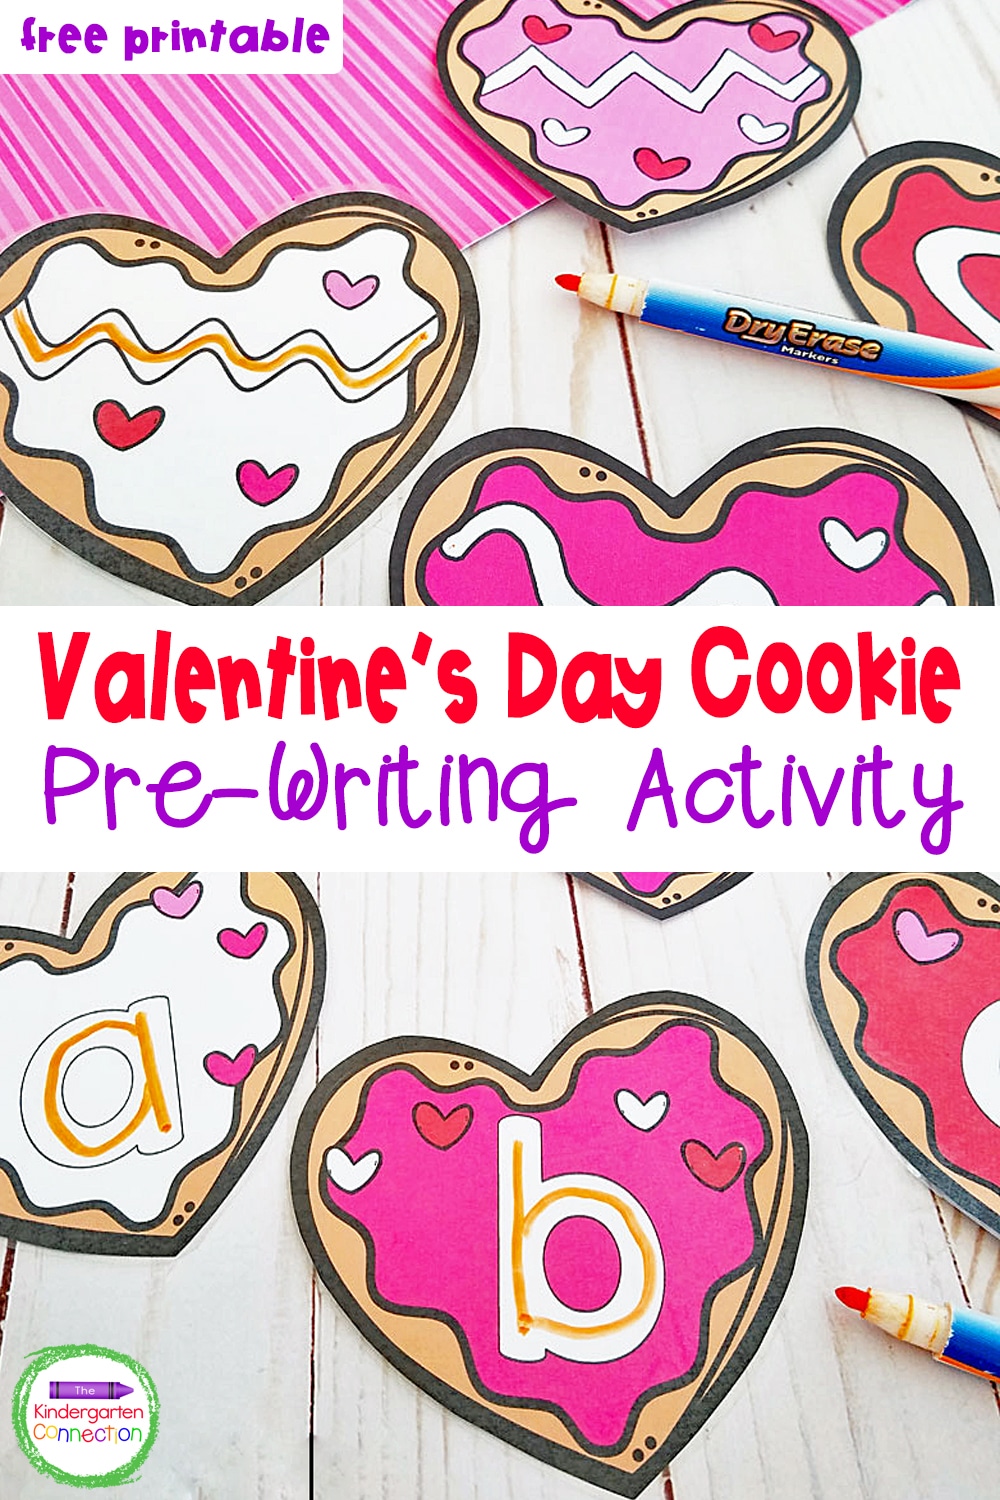 This free printable Valentine's Day Cookie Pre-Writing Activity is perfect for Pre-K and Kindergarten writing centers!